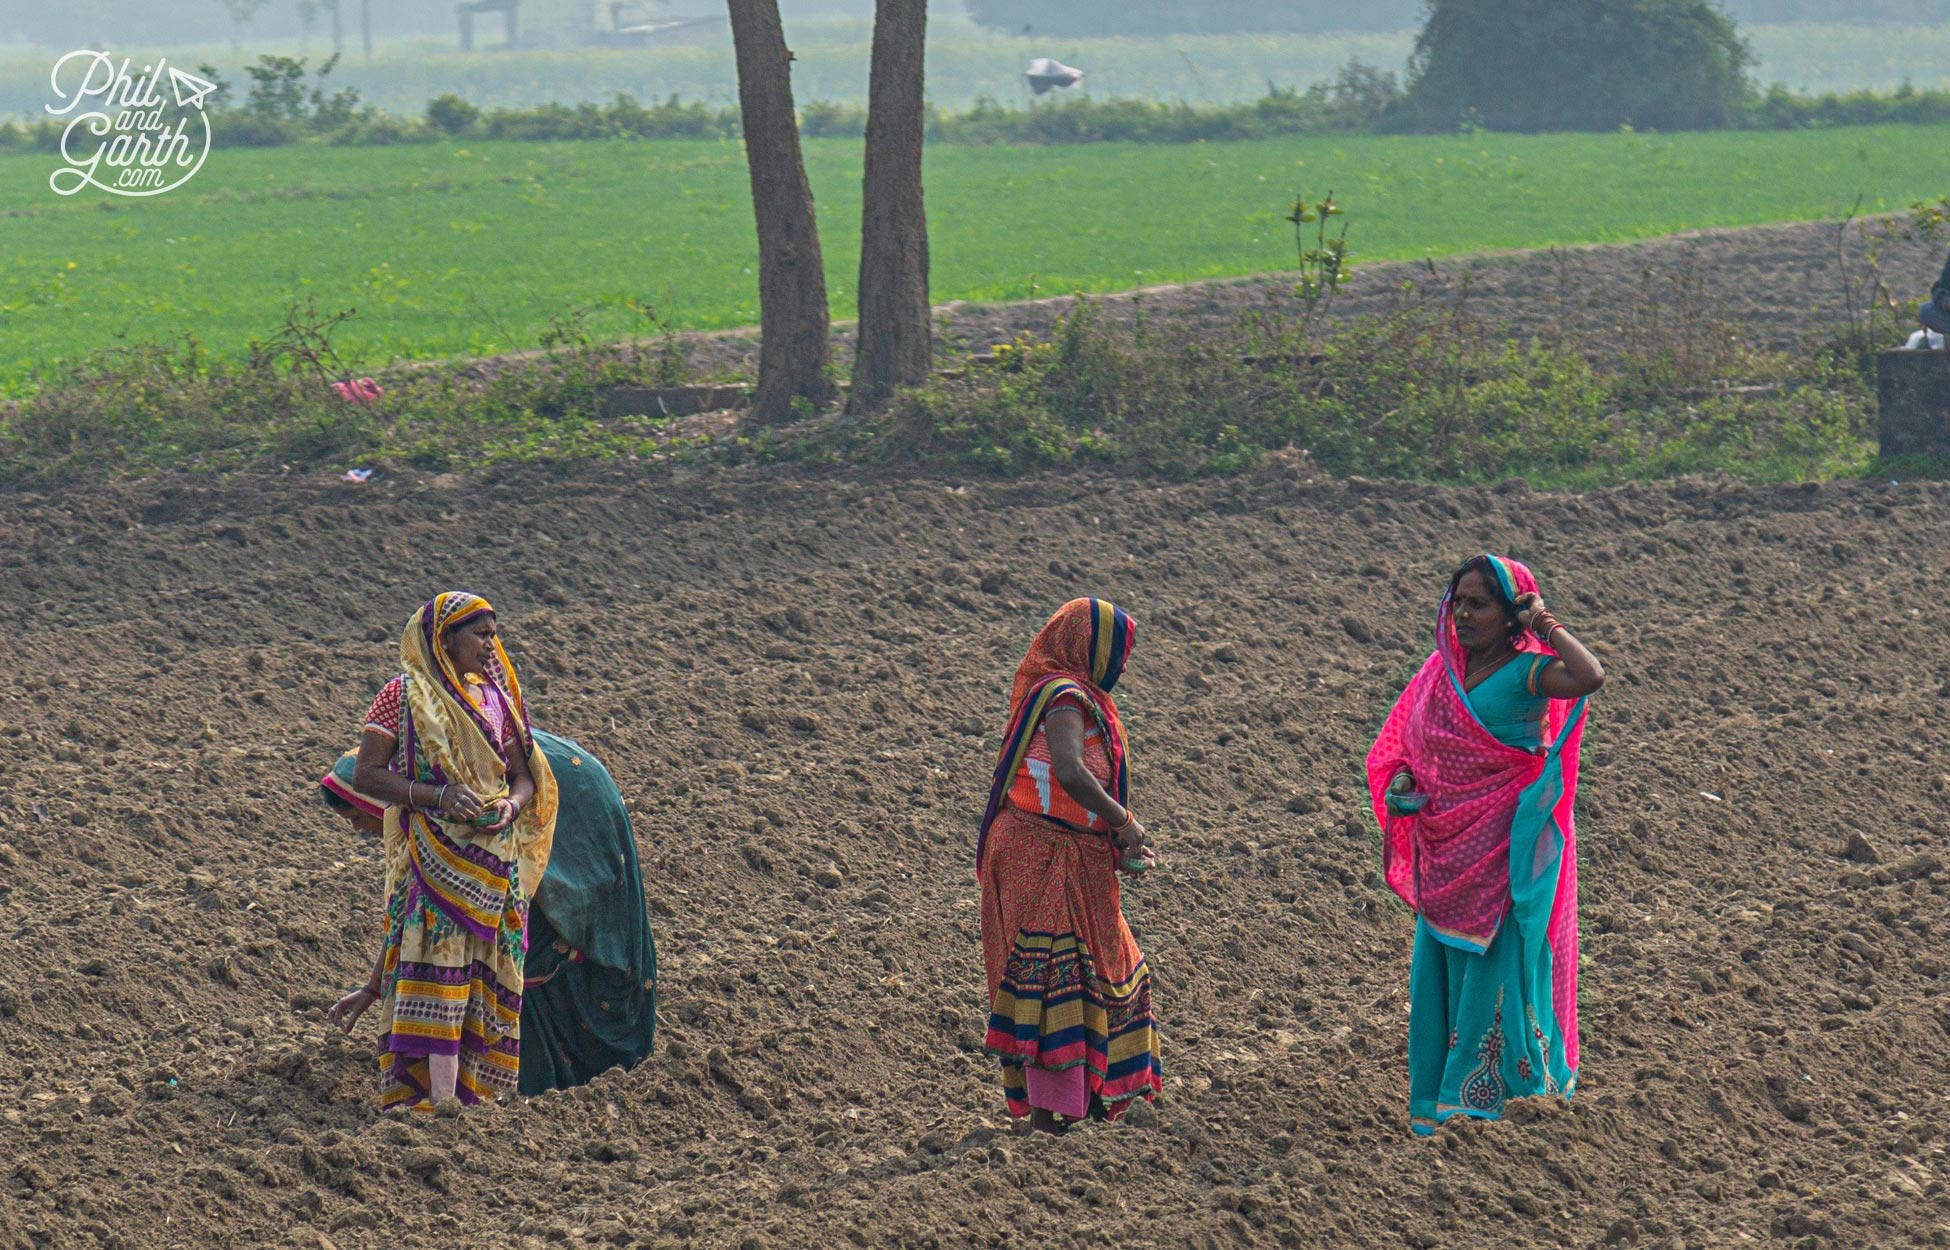 A group of ladies hard at work in the fields